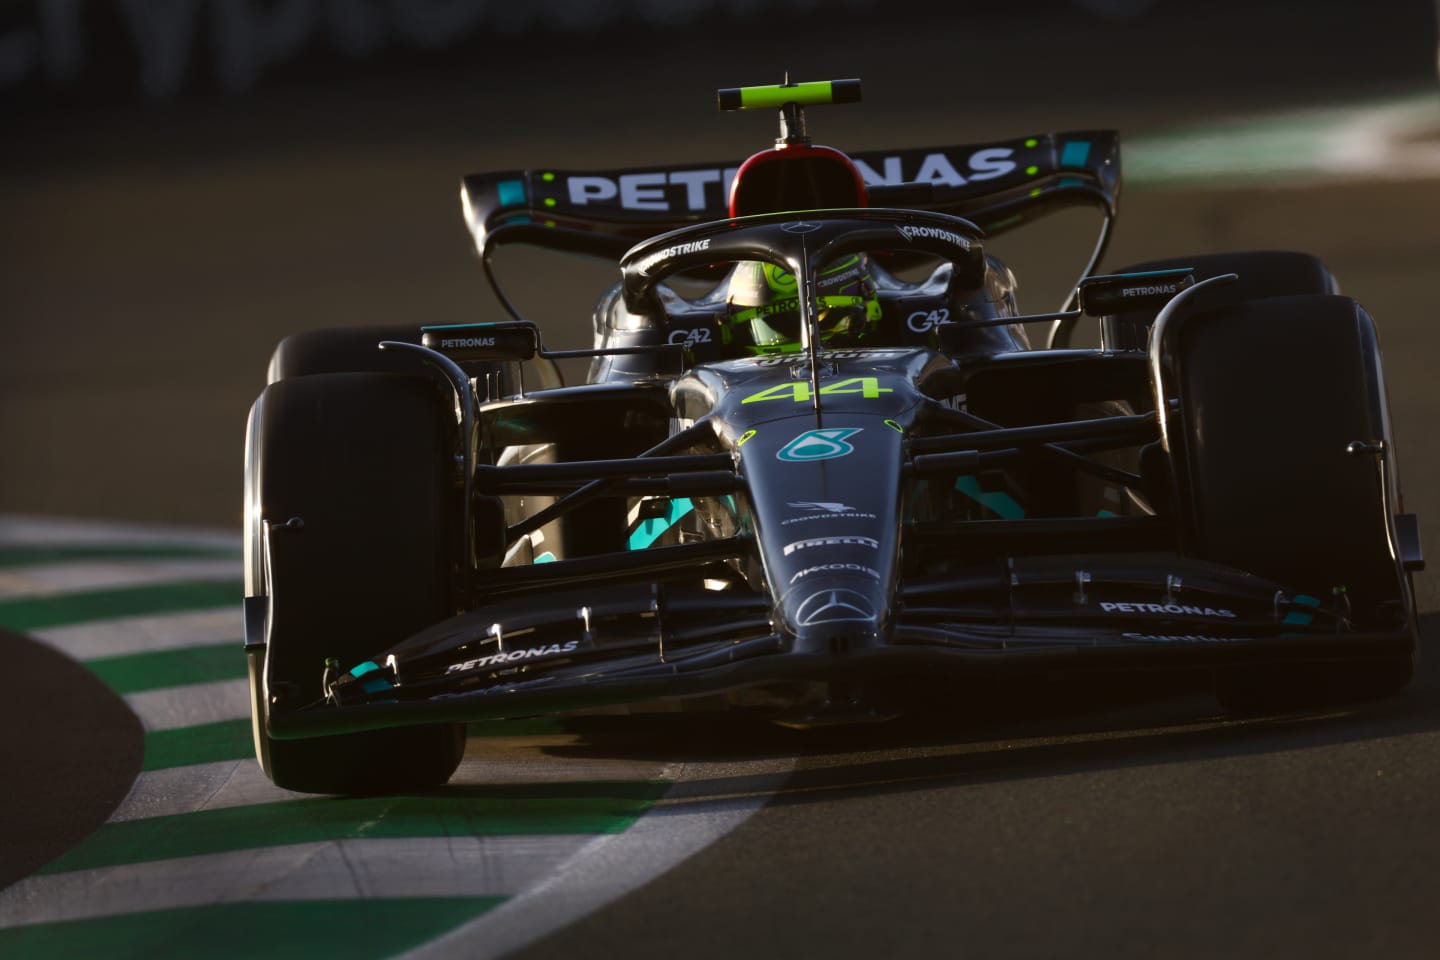 Mercedes took P5 and P7 in the opening race at Bahrain International Circuit